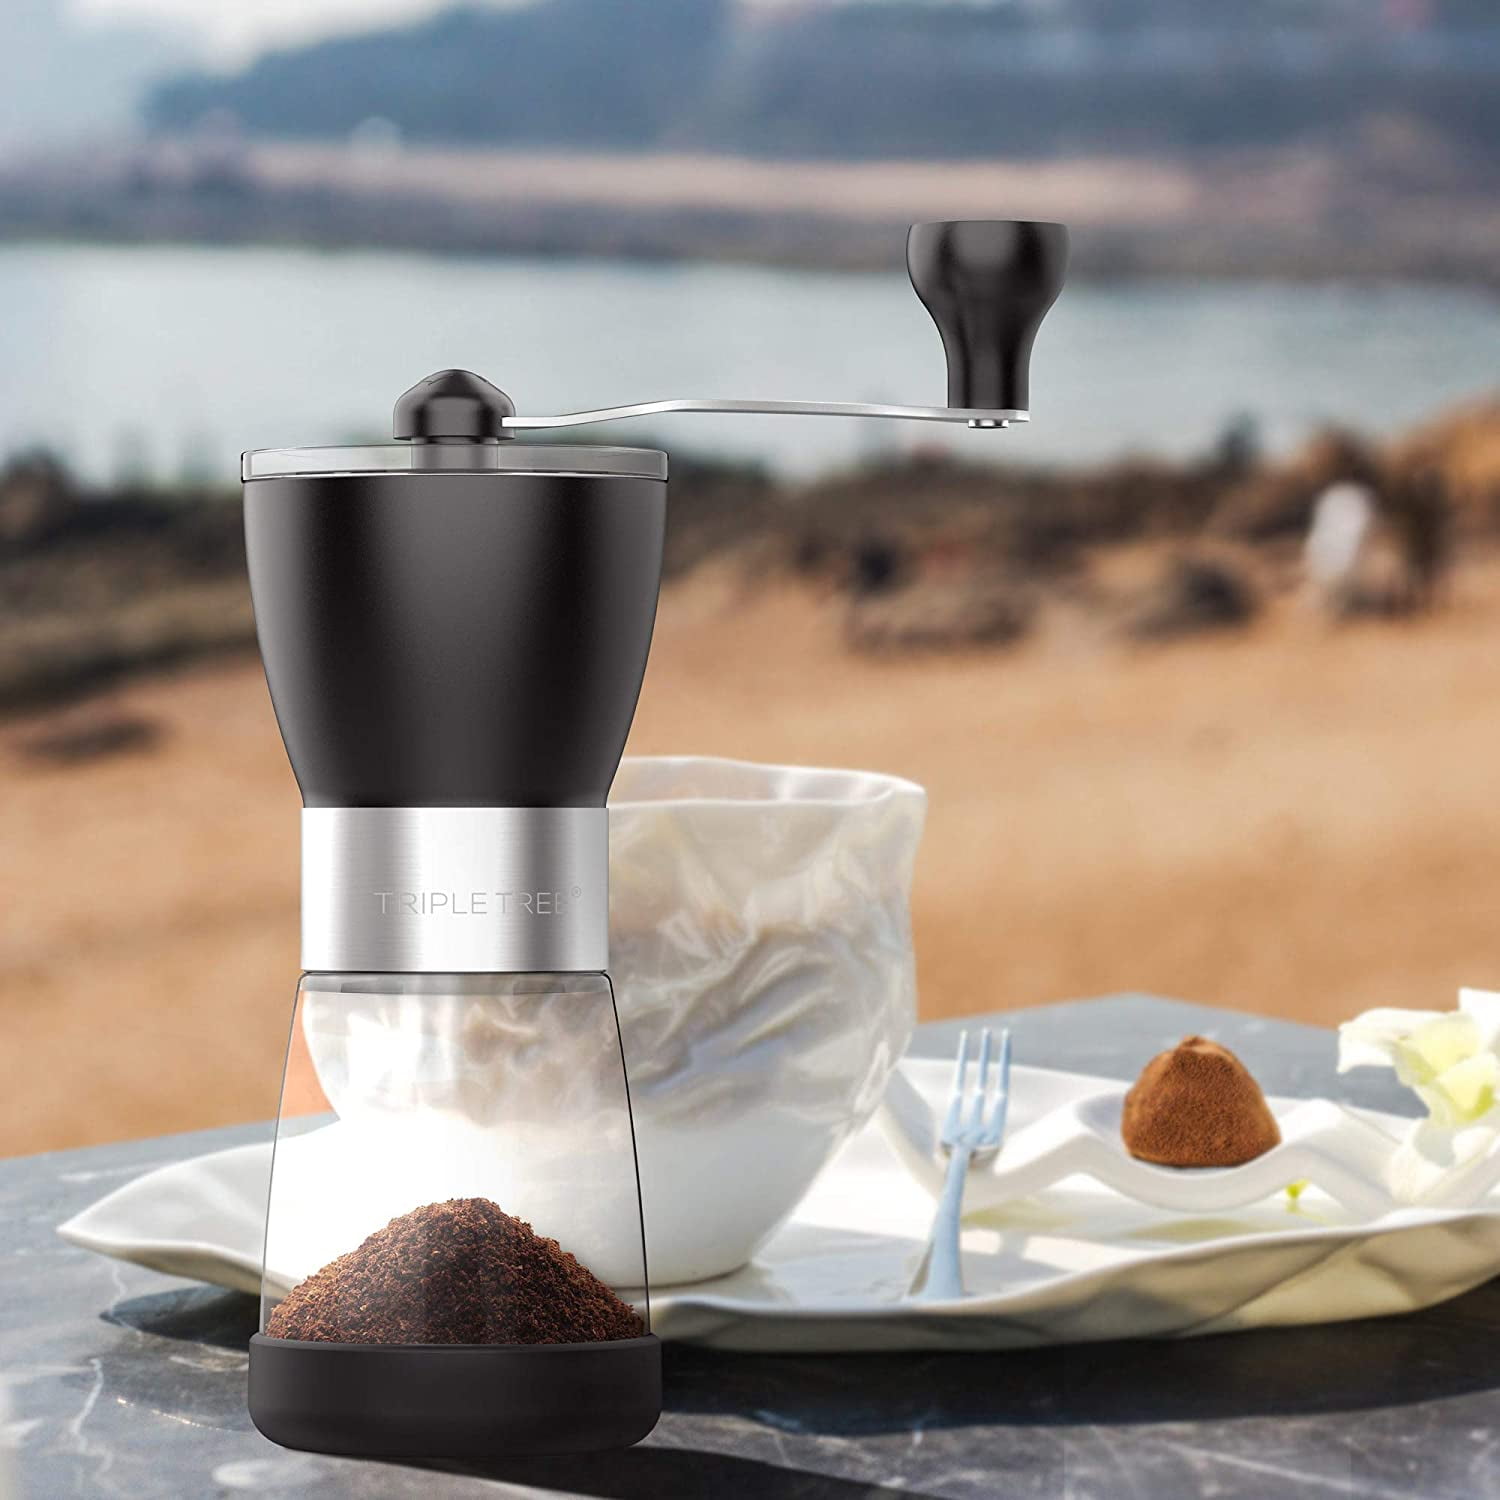 PARACITY Manual Coffee Bean Grinder with Ceramic Burr, Hand Coffee Grinder  Mill Small with 2 Glass Jars( 11OZ per Jar) Stainless Steel Handle for Drip